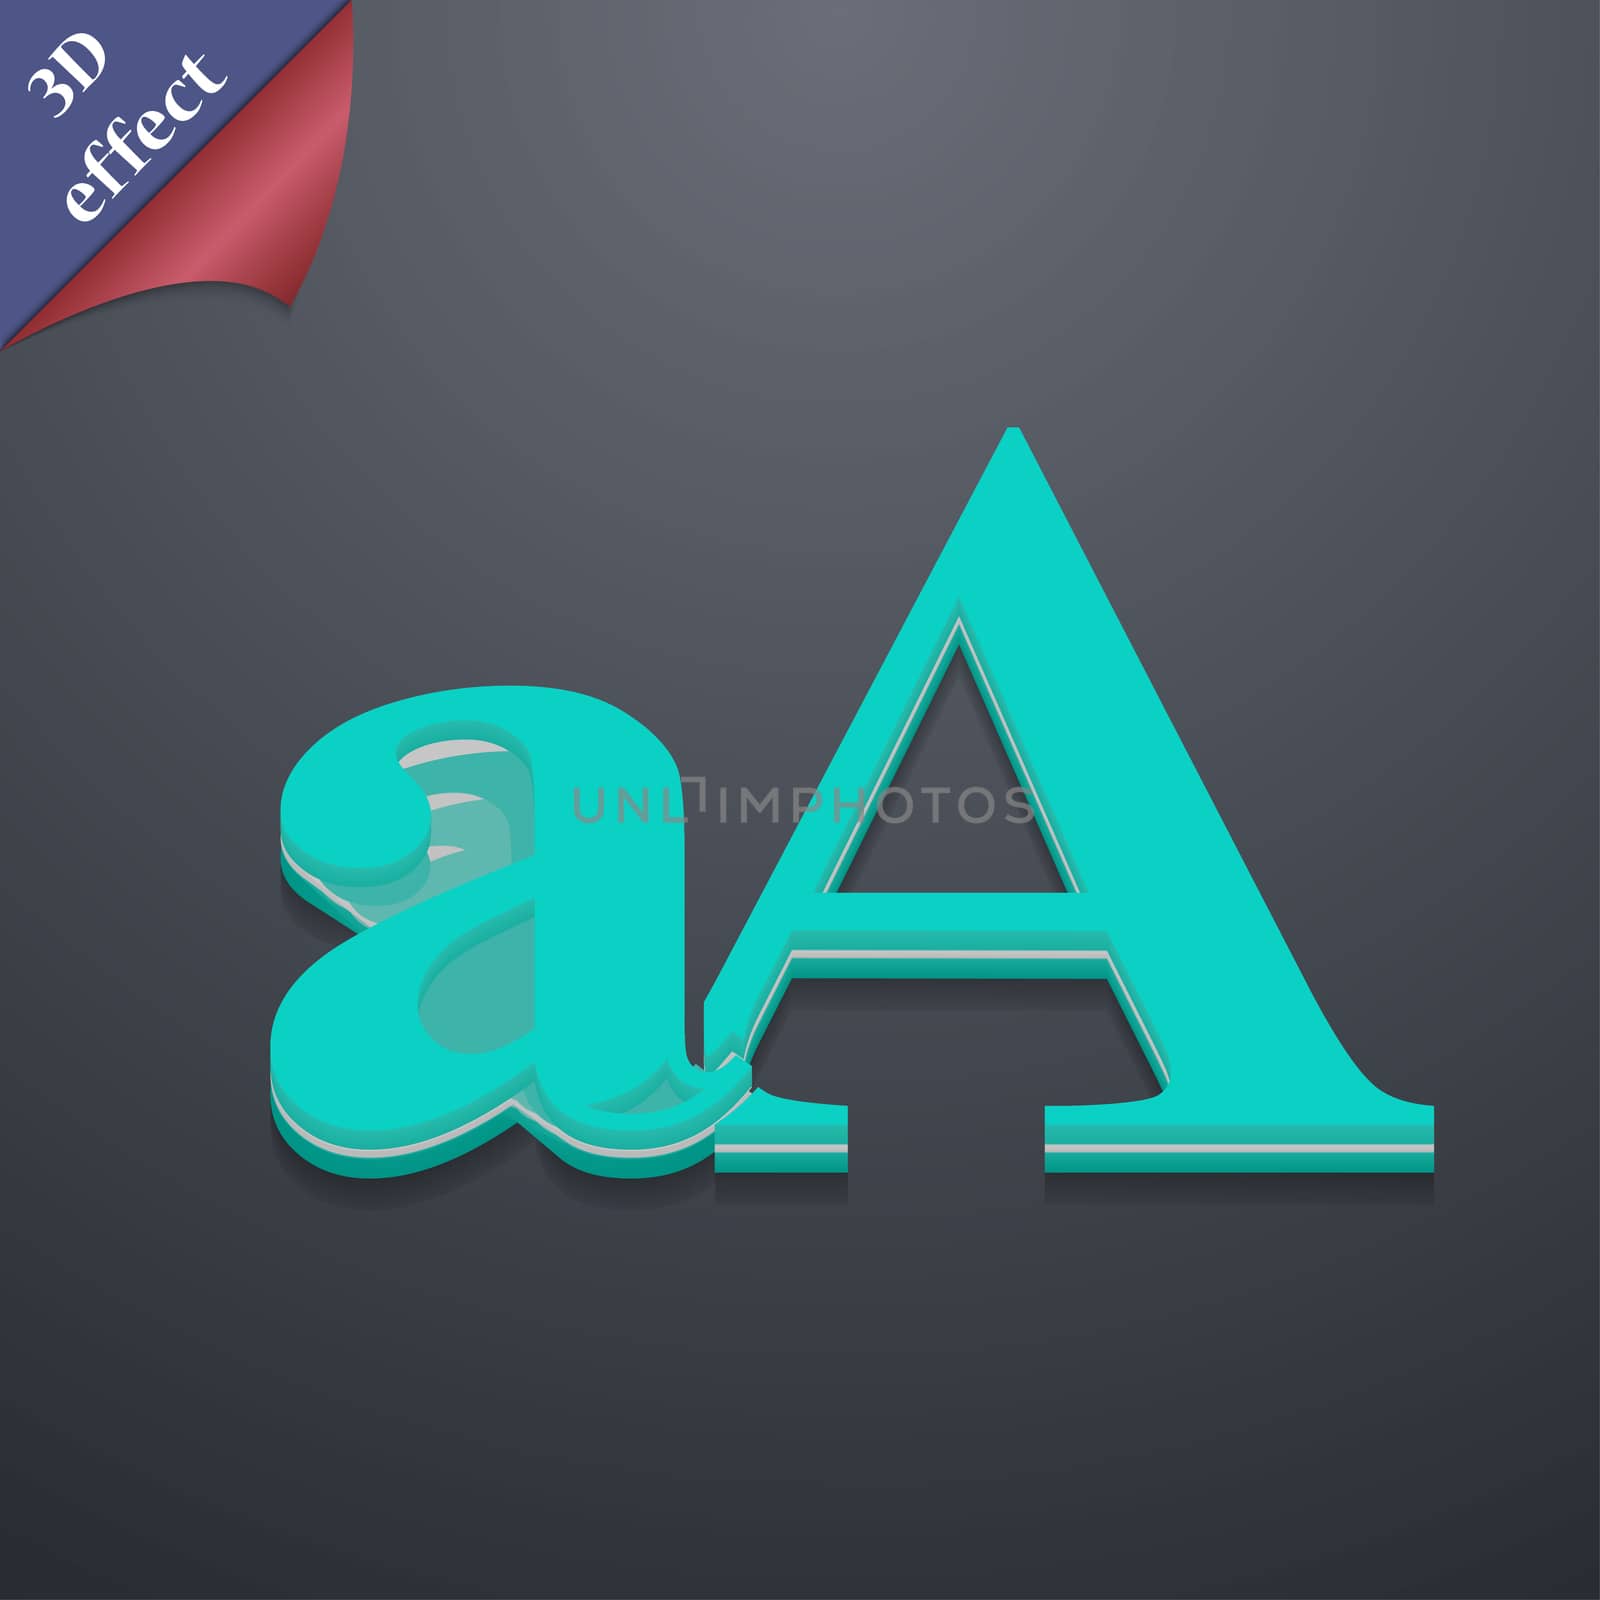 Enlarge font, aA icon symbol. 3D style. Trendy, modern design with space for your text illustration. Rastrized copy